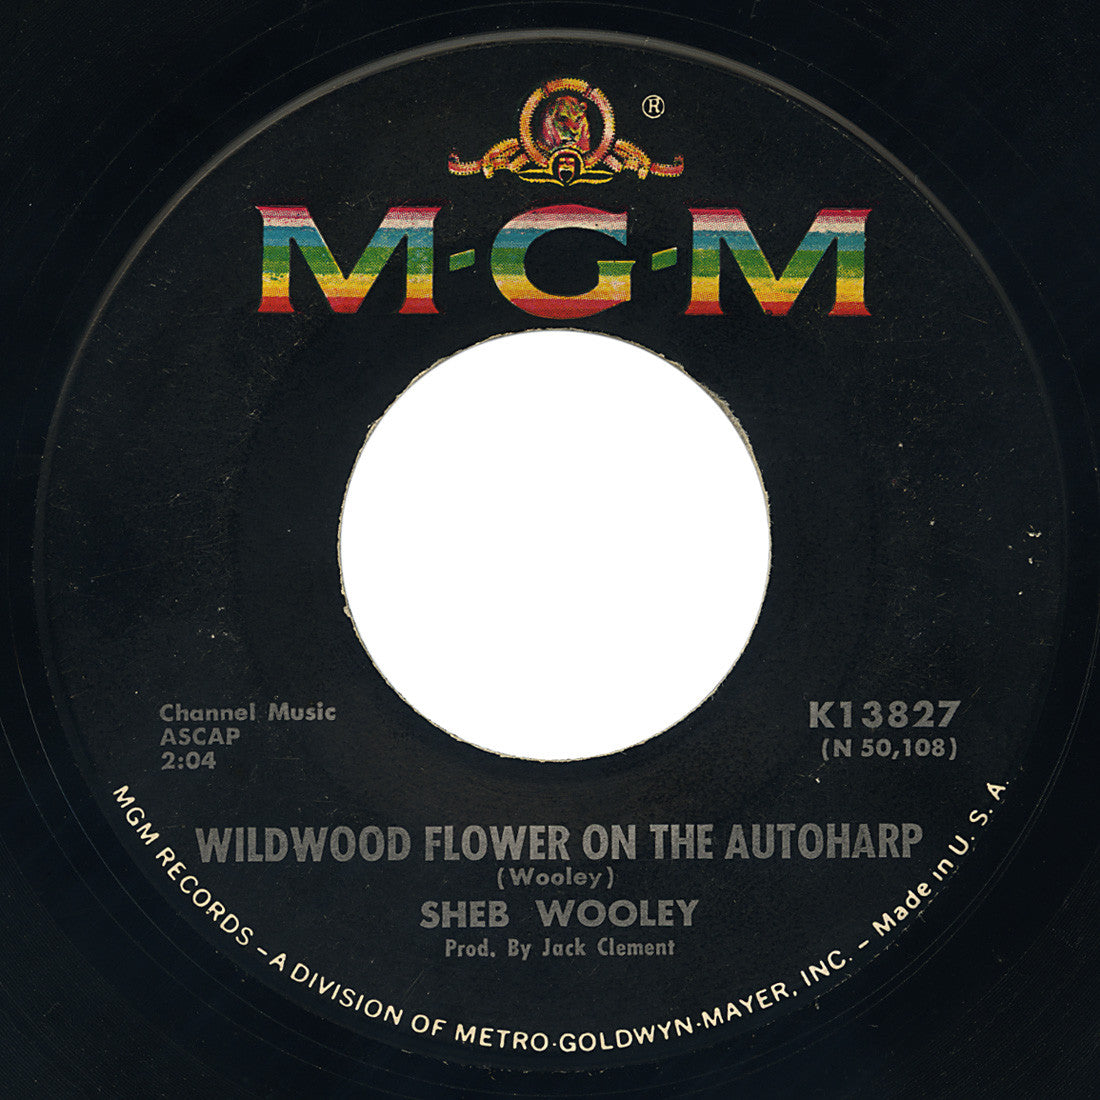 Sheb Wooley – Wildwood Flower On The Autoharp – MGM